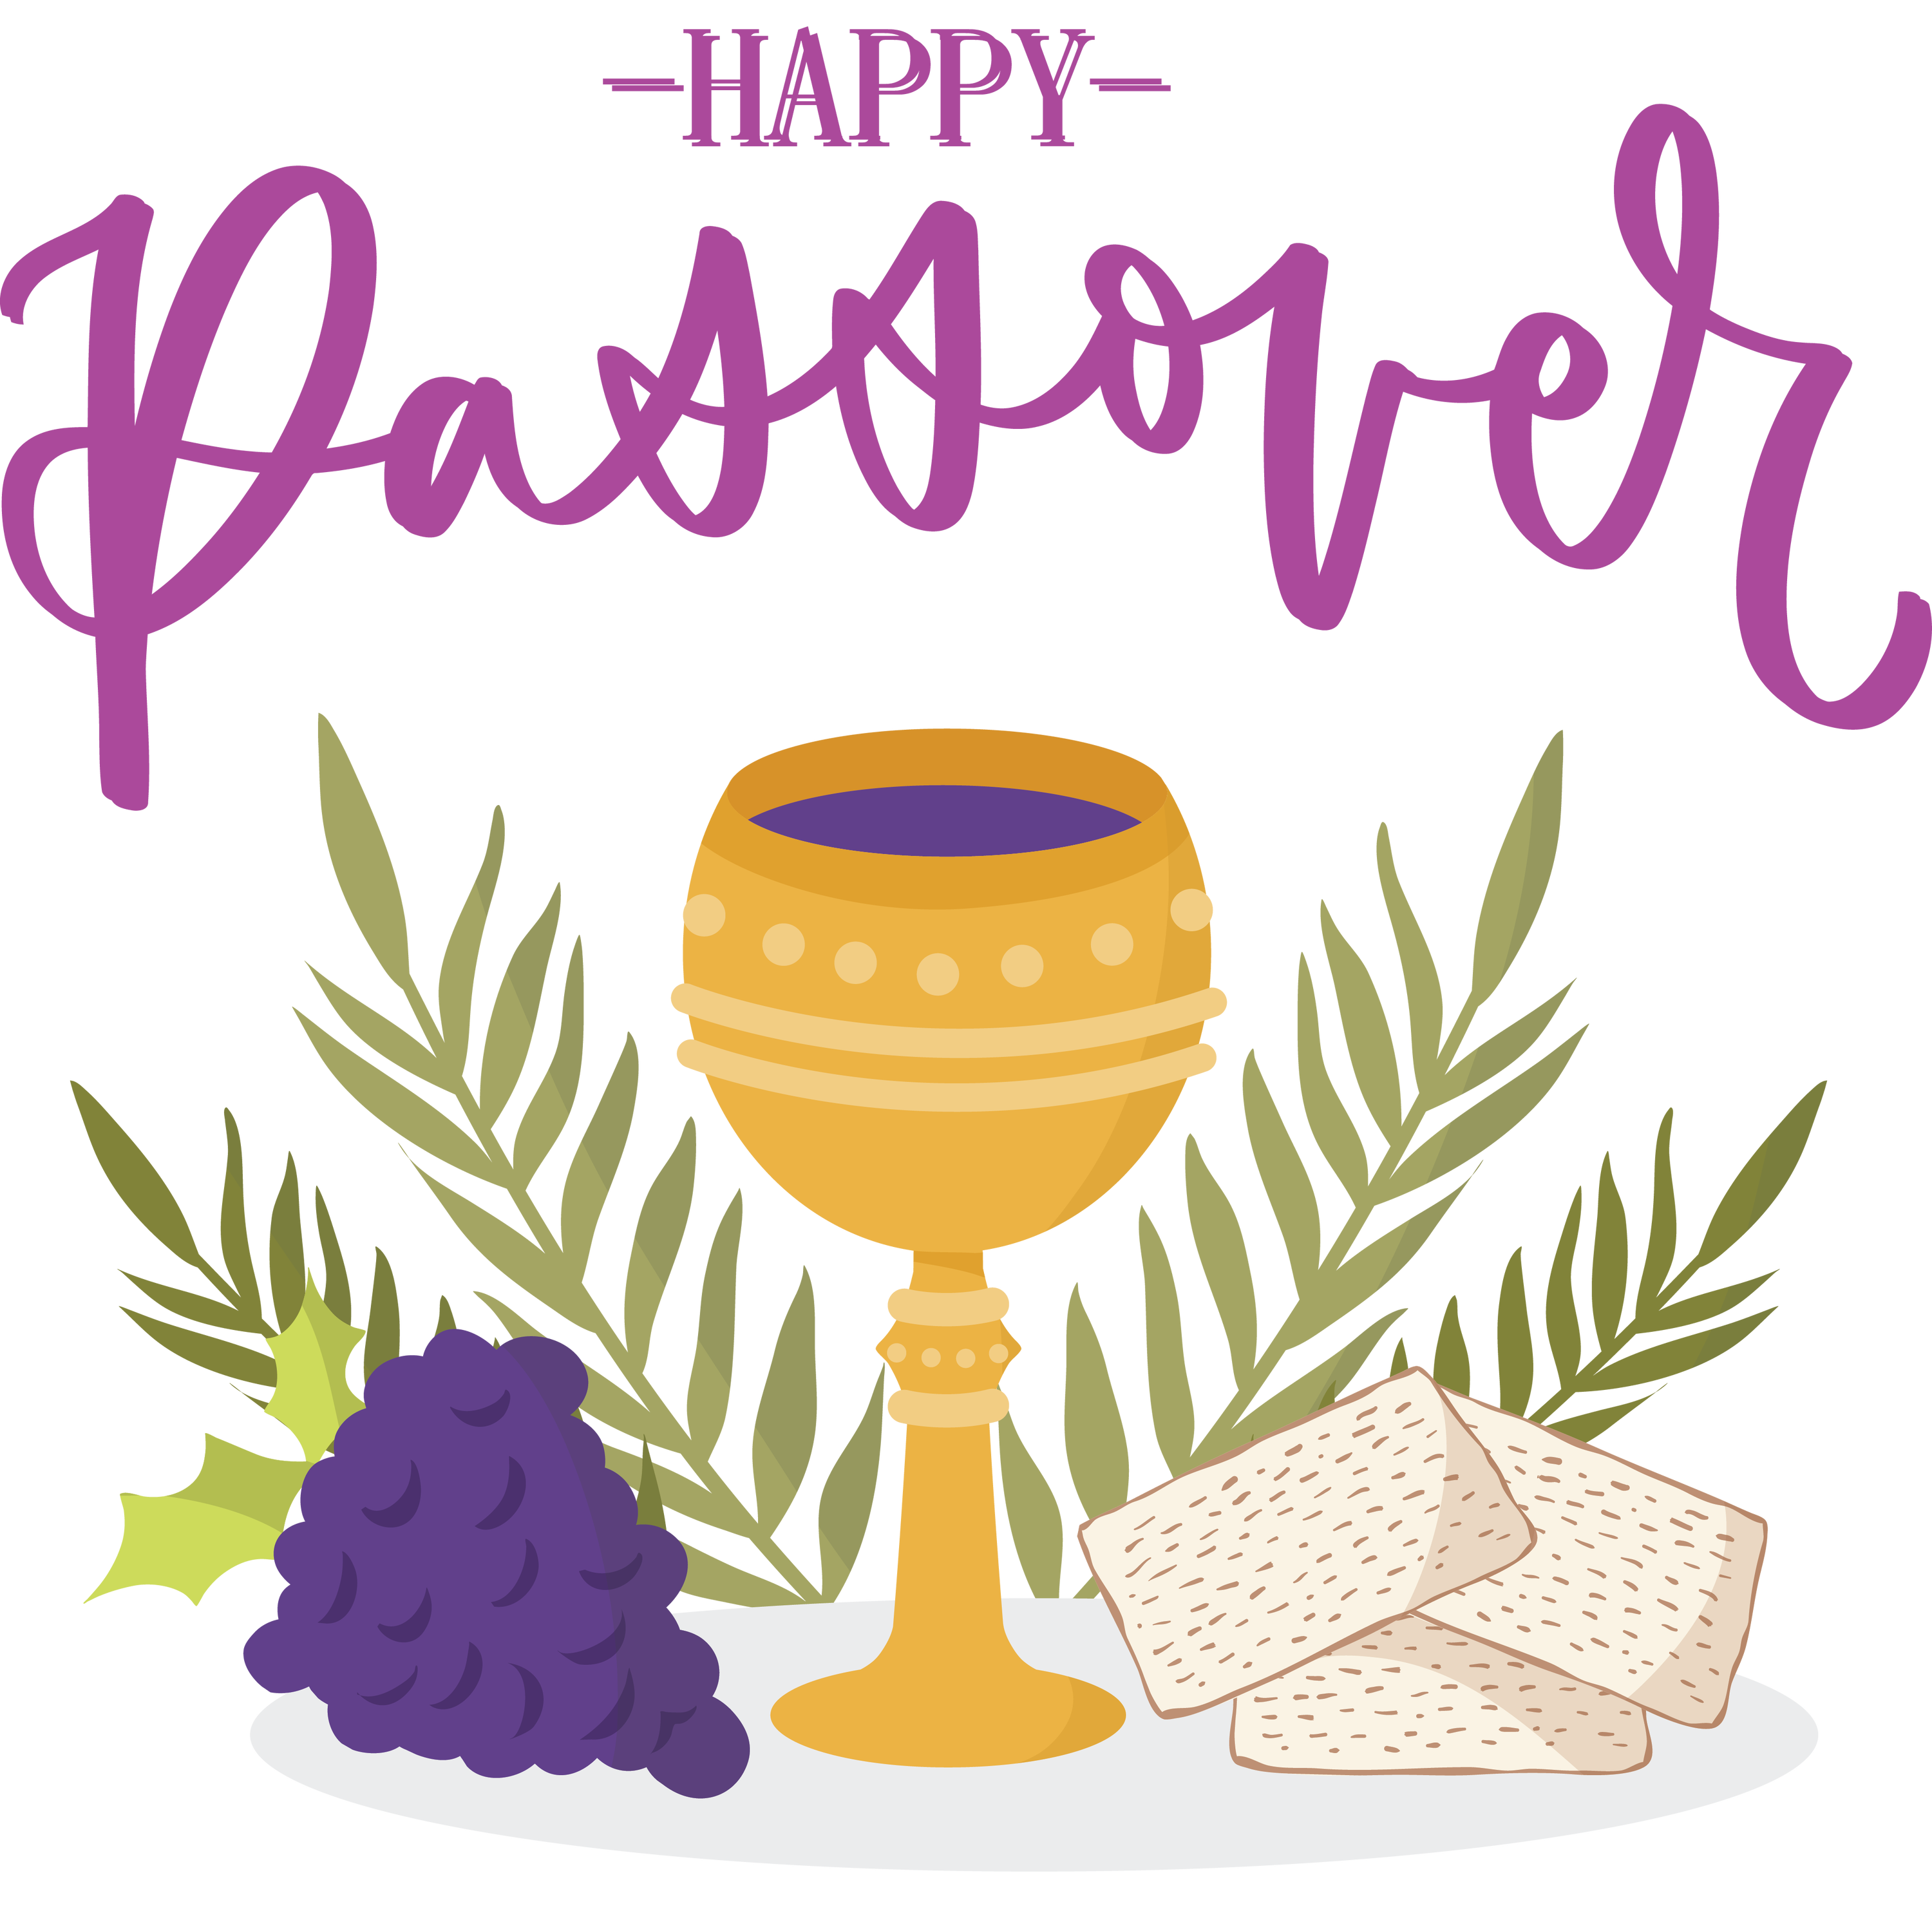 Happy Passover Download Transparent PNG Image PNG Arts